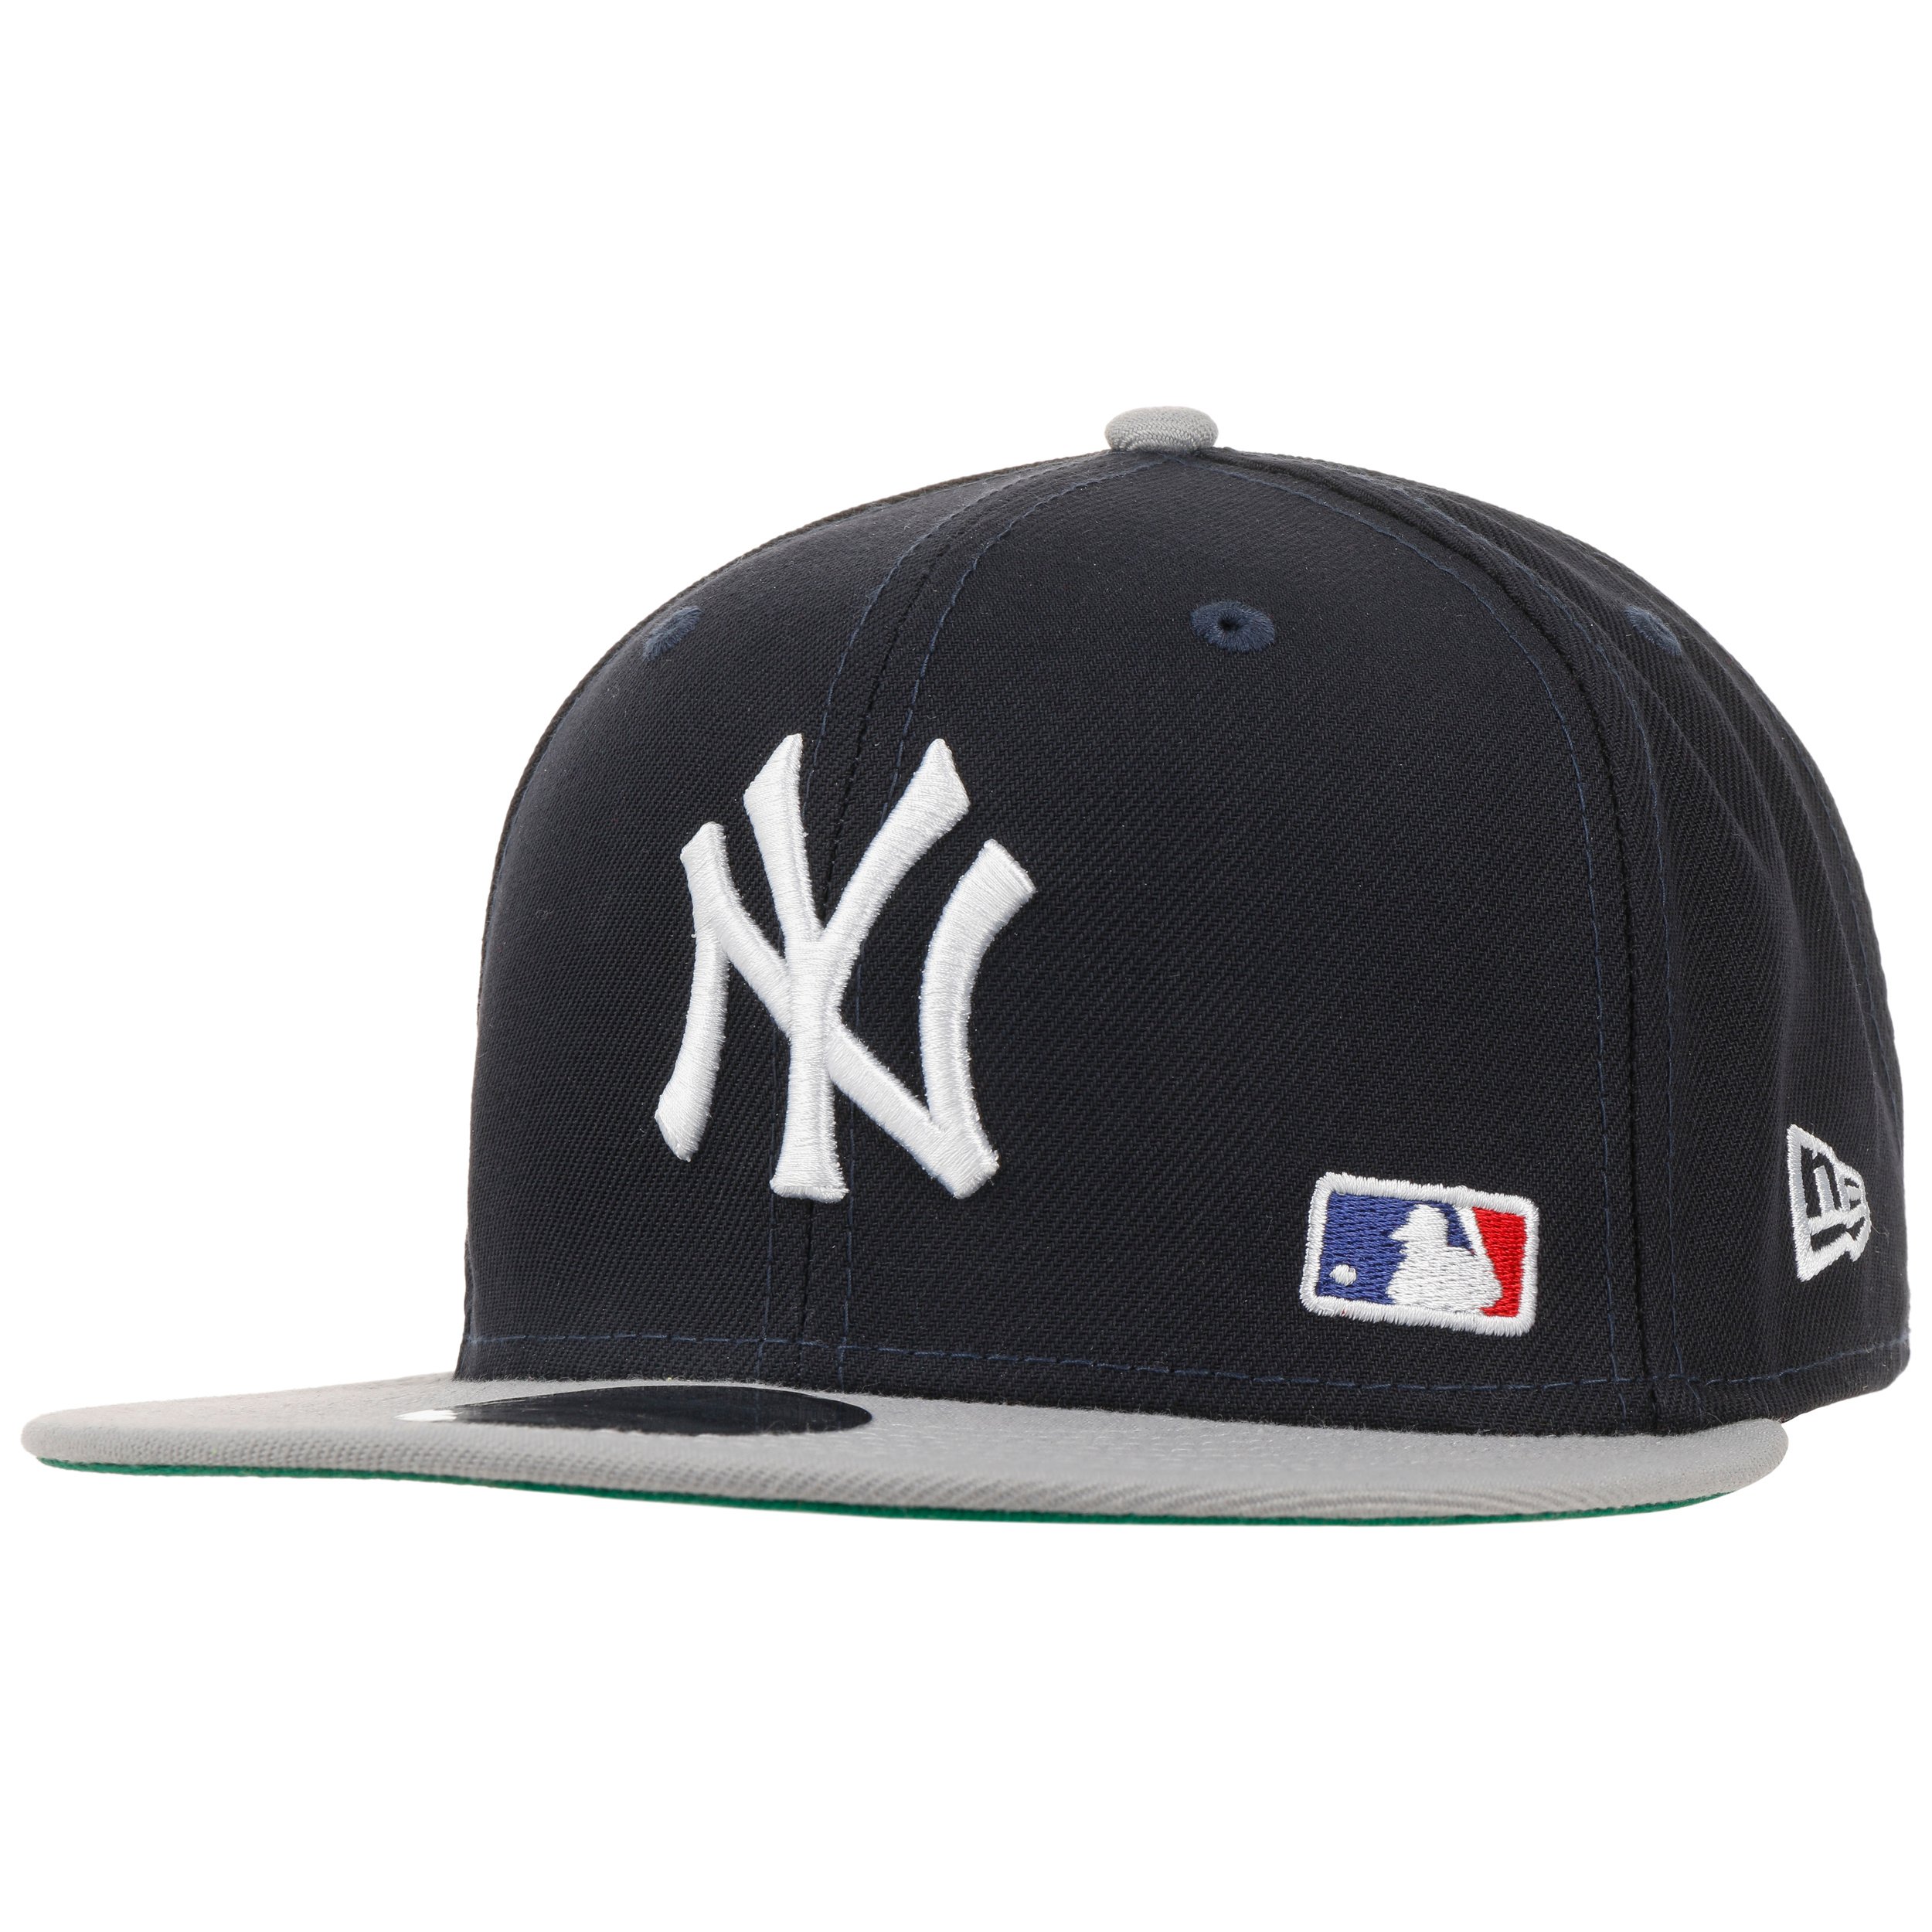 9Fifty MLB Arch Yankees Cap New --> Shop Hats, Beanies & Caps online Hatshopping